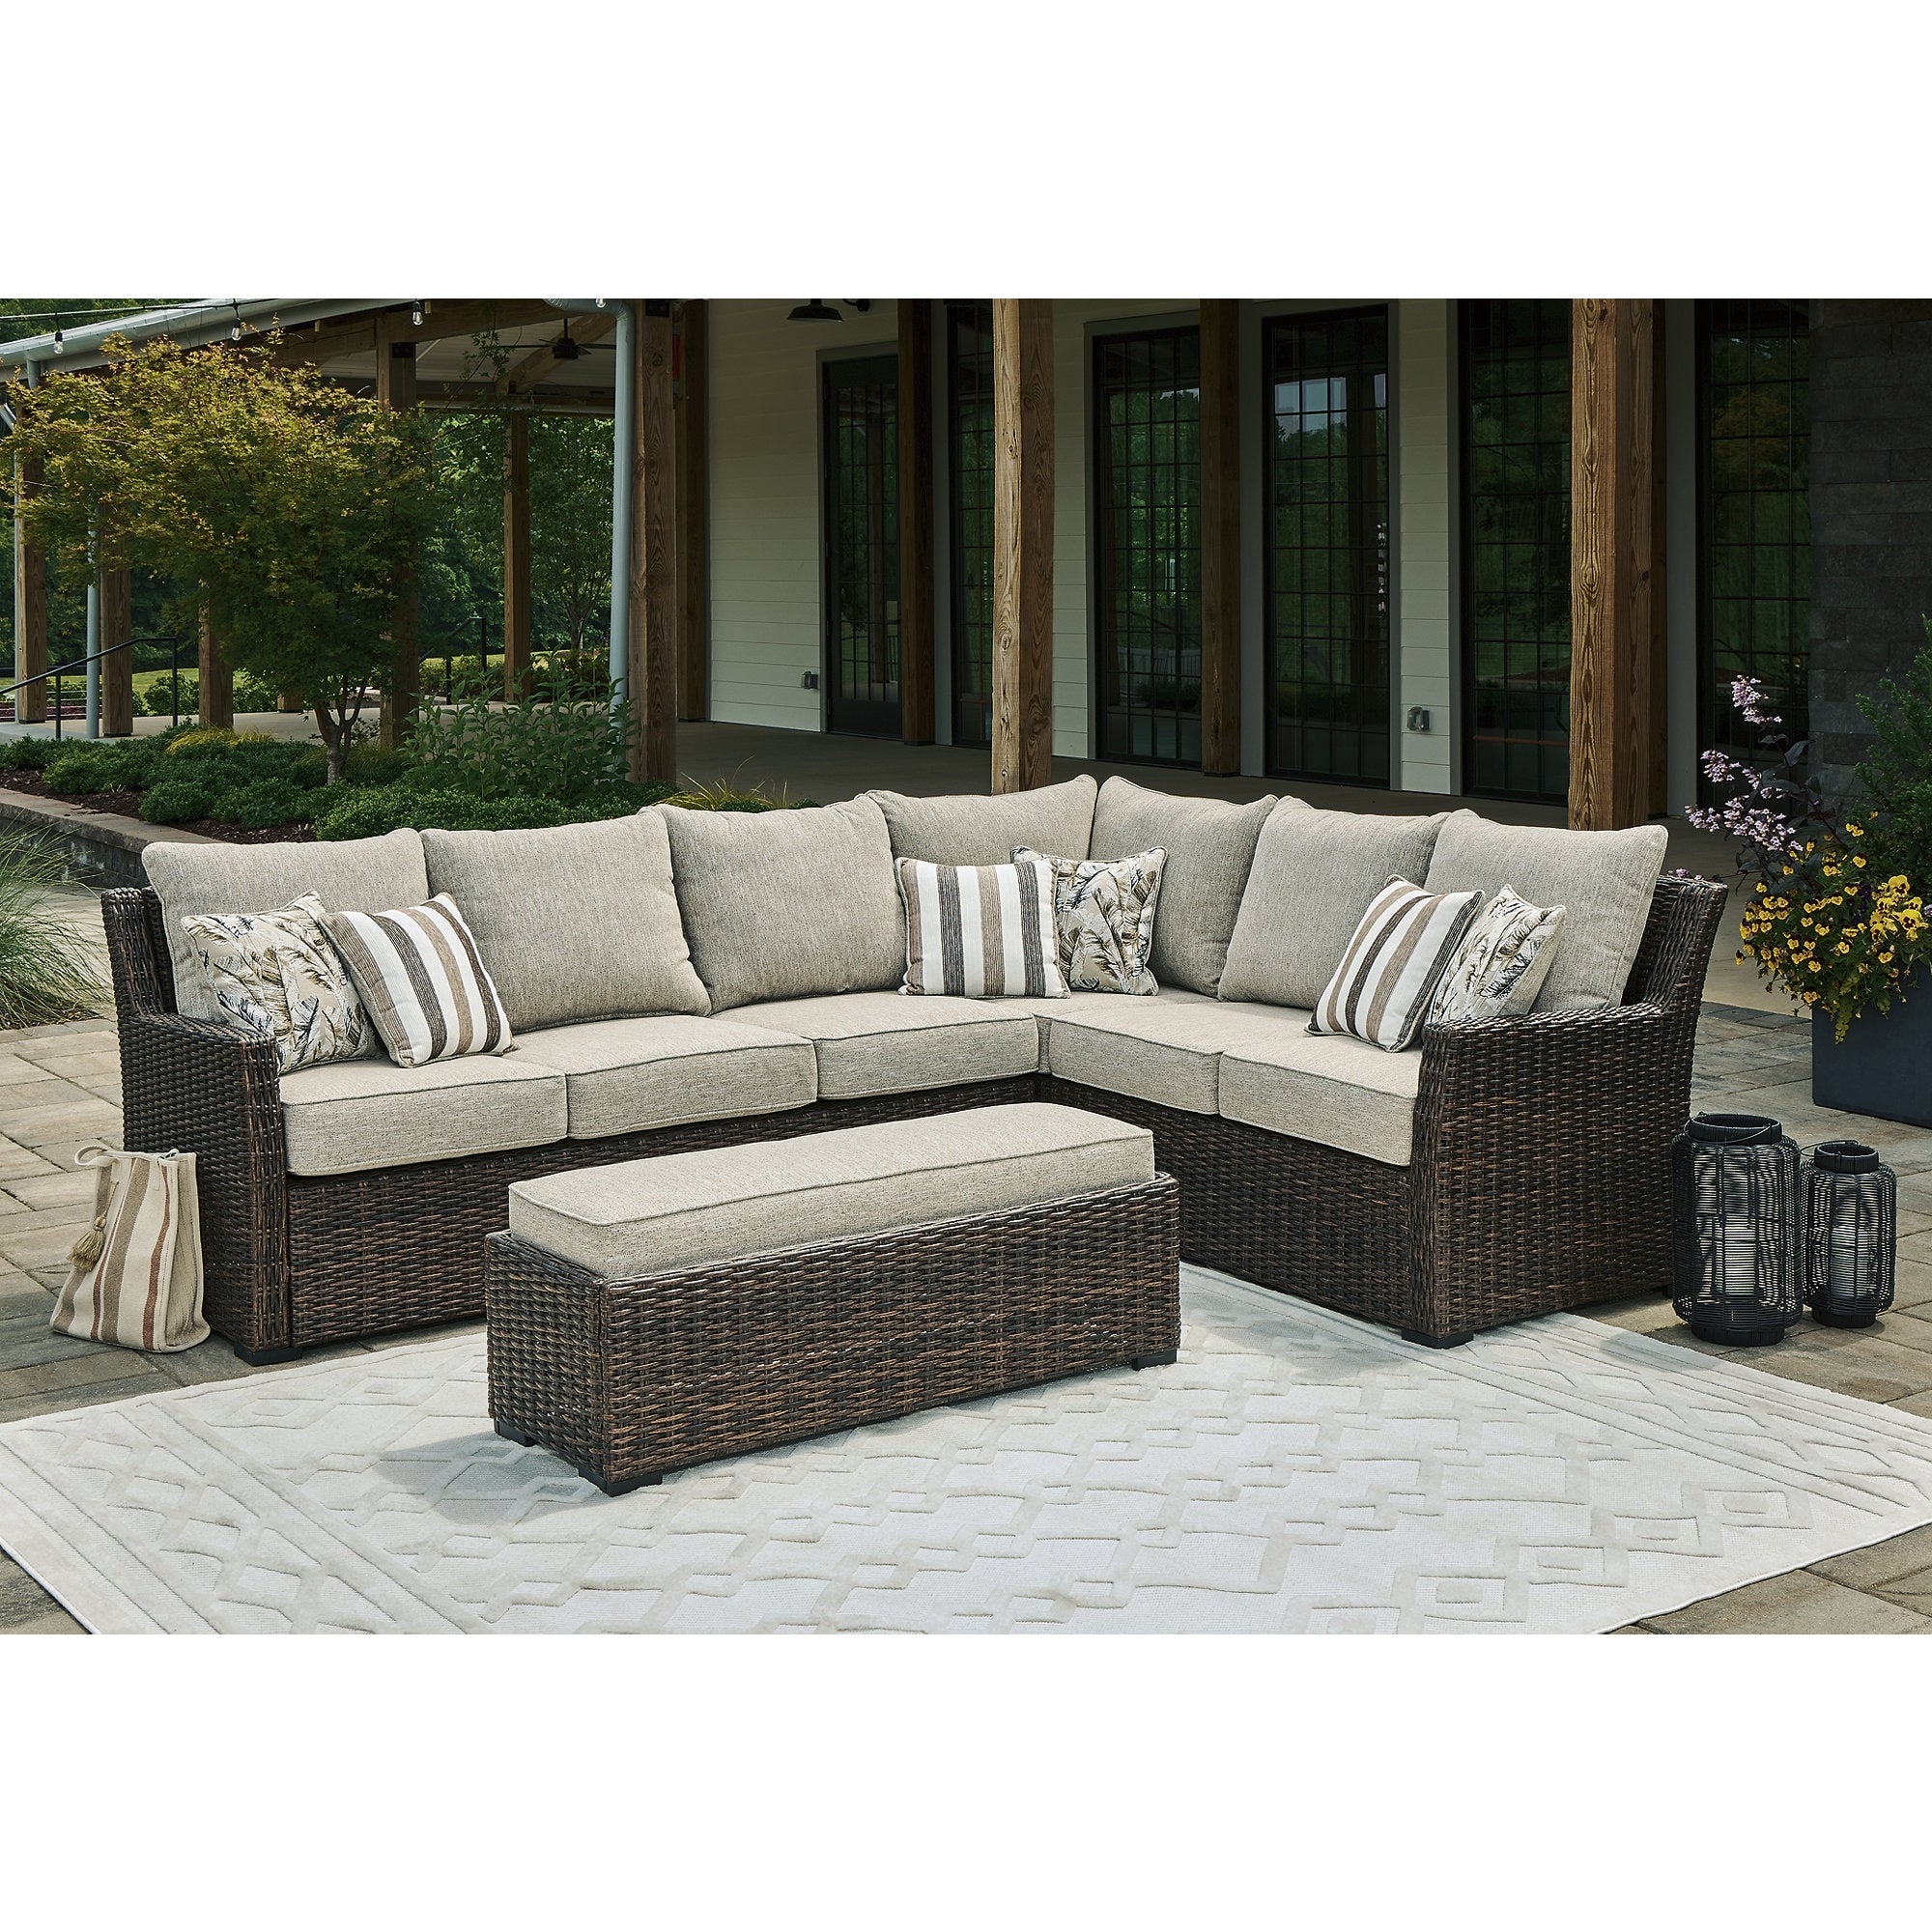 Signature Design by Ashley Brook Ranch Brown Outdoor Sofa Sectional/Be ...